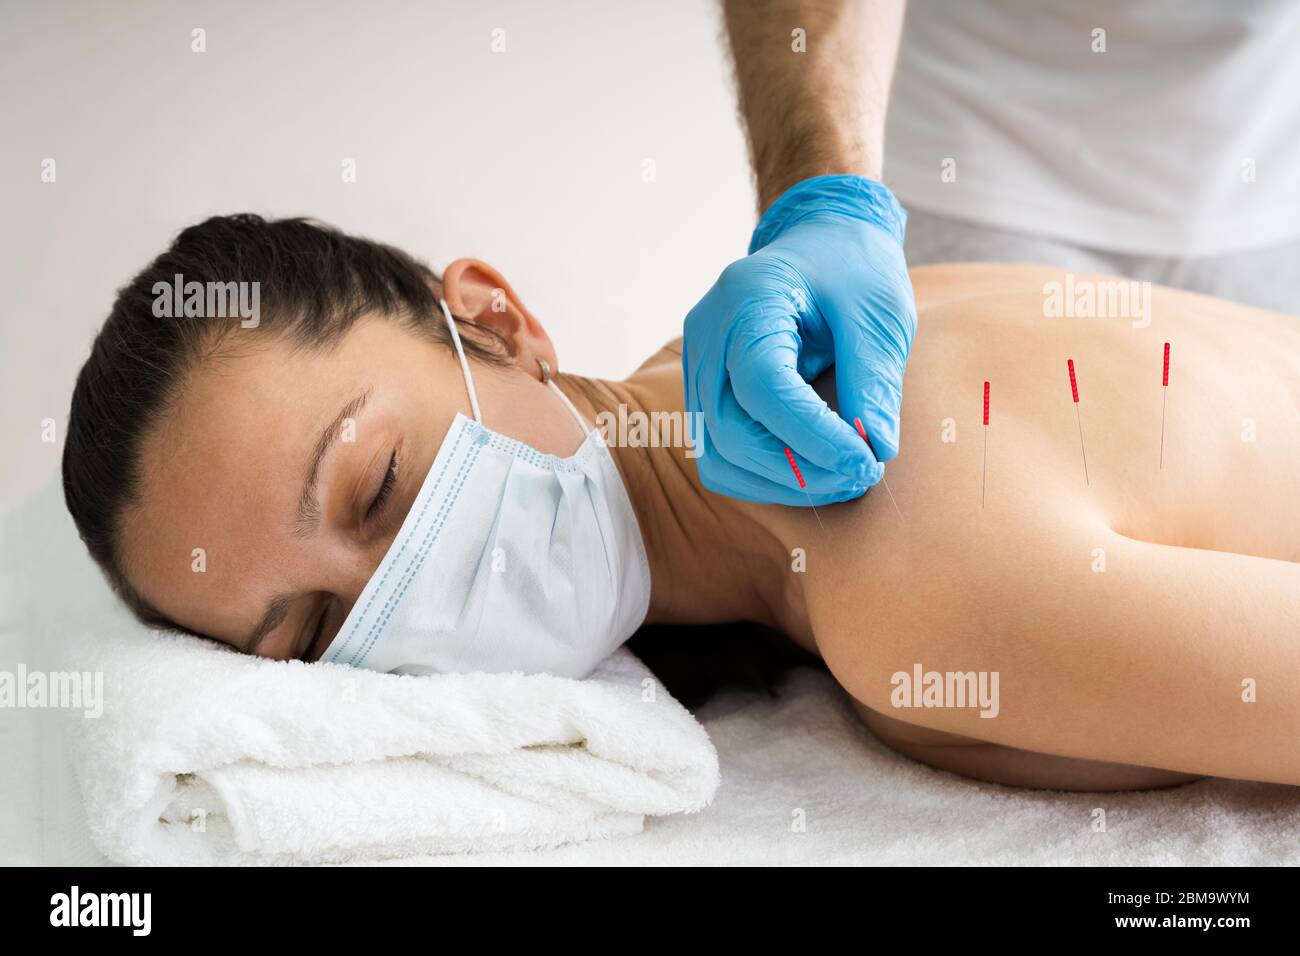 Acupuncture Skin Treatment For Women In Face Mask Stock Photo